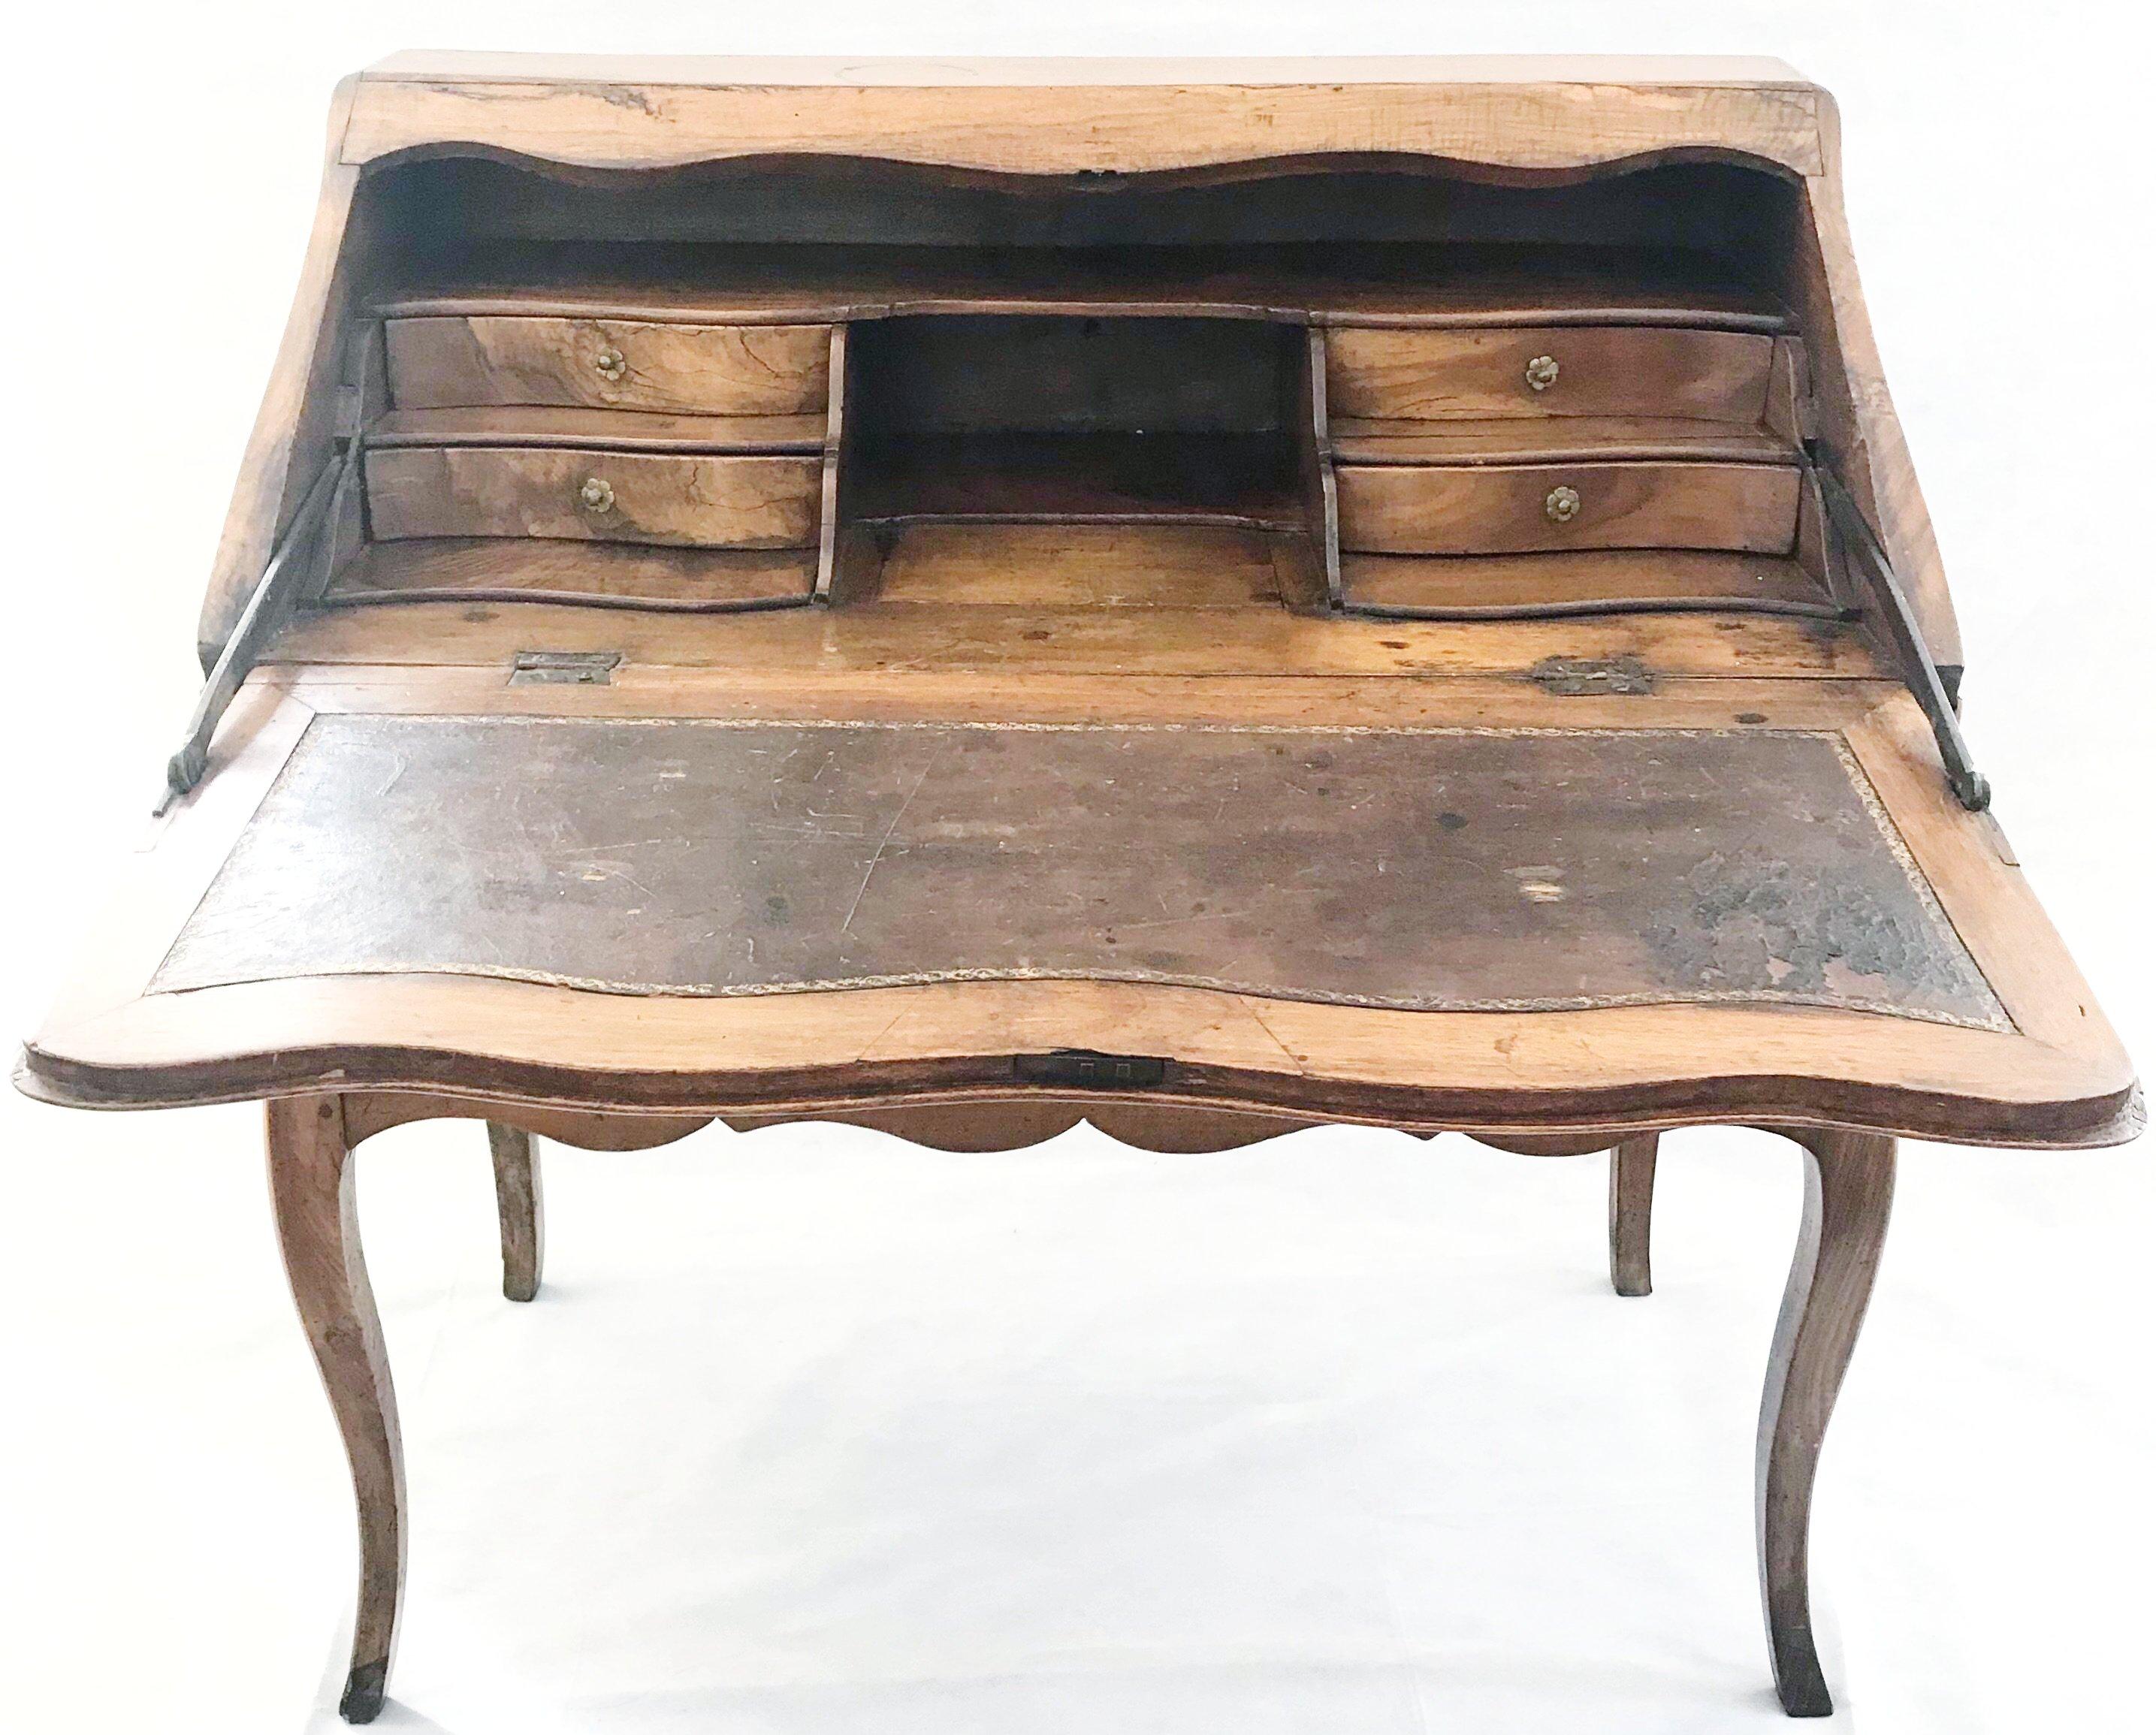 Beautiful antique French Louis XV slant front desk with cabriole legs, original leather writing pad and four curved side drawers surrounding center compartment. Some early repair to legs. Excellent shape for its age and beautiful patina.